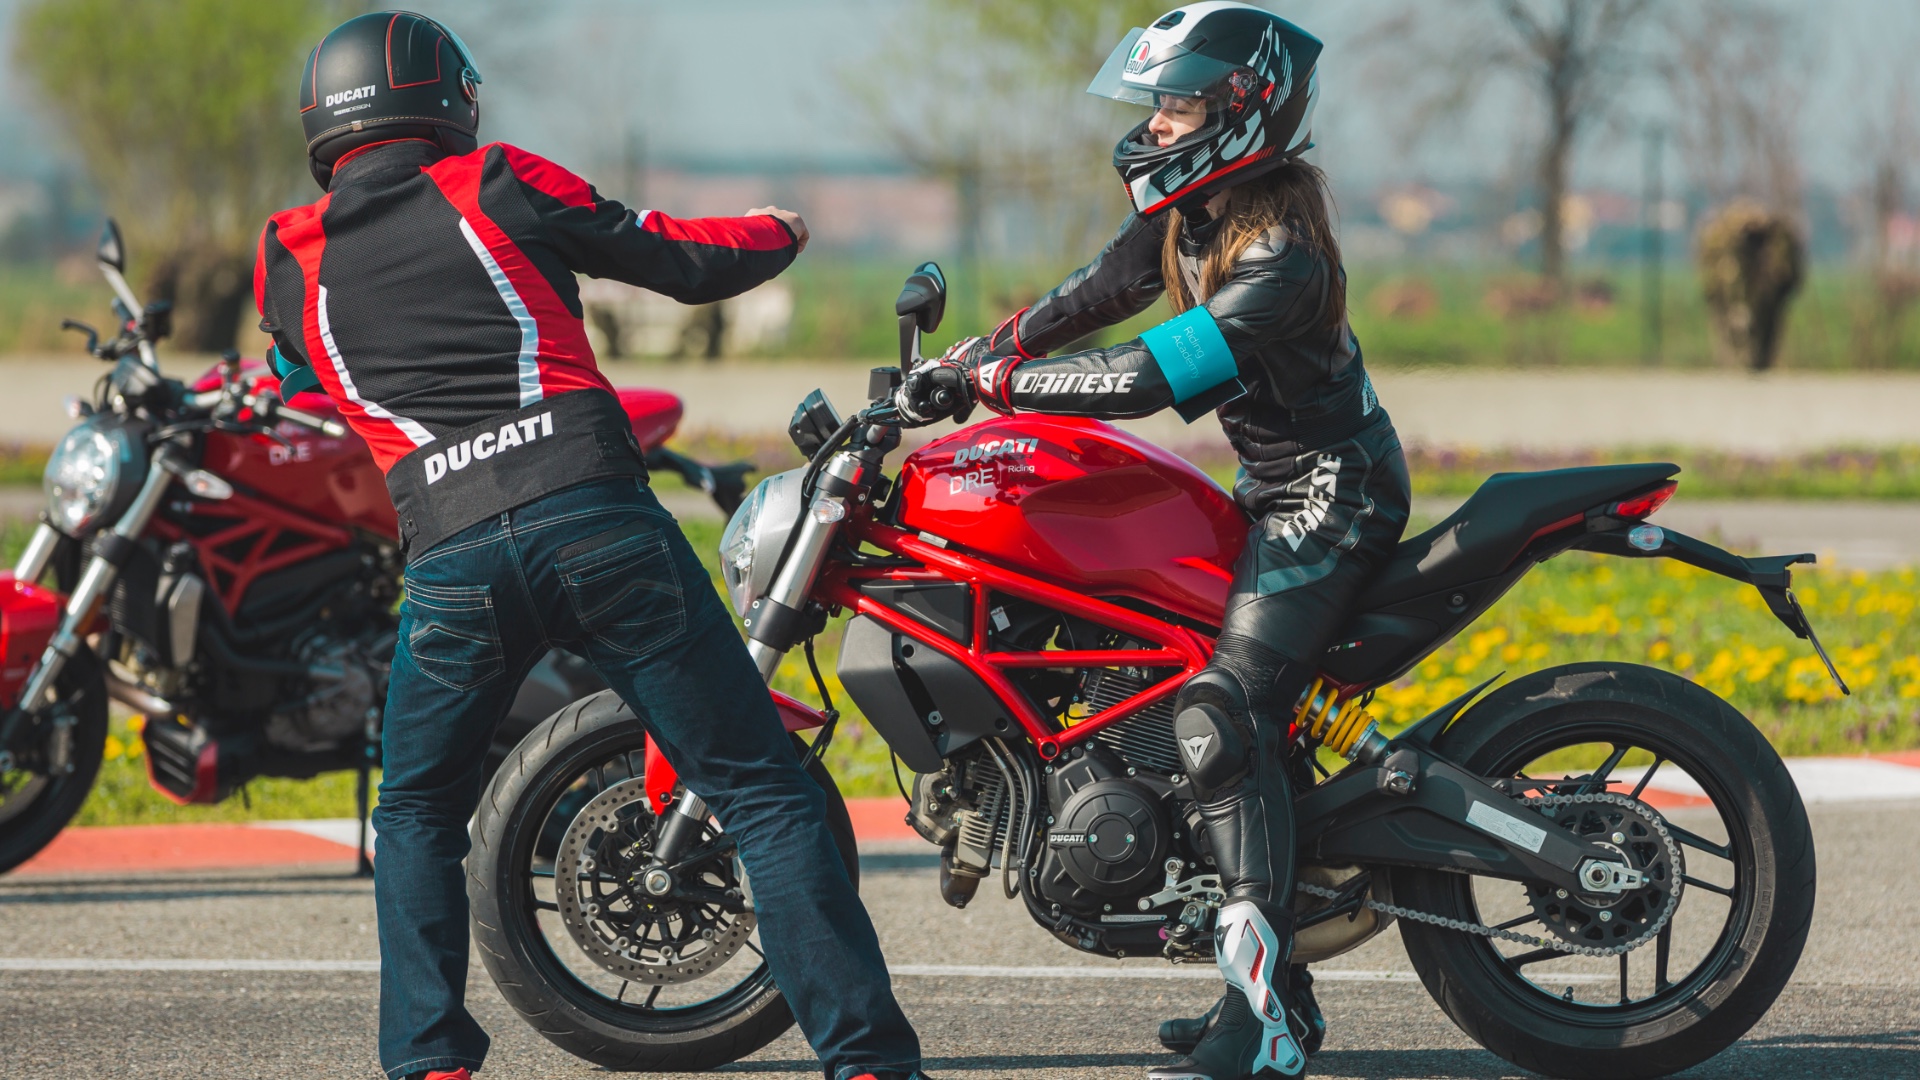 Ducati Riding Experience – Road Academy 2019